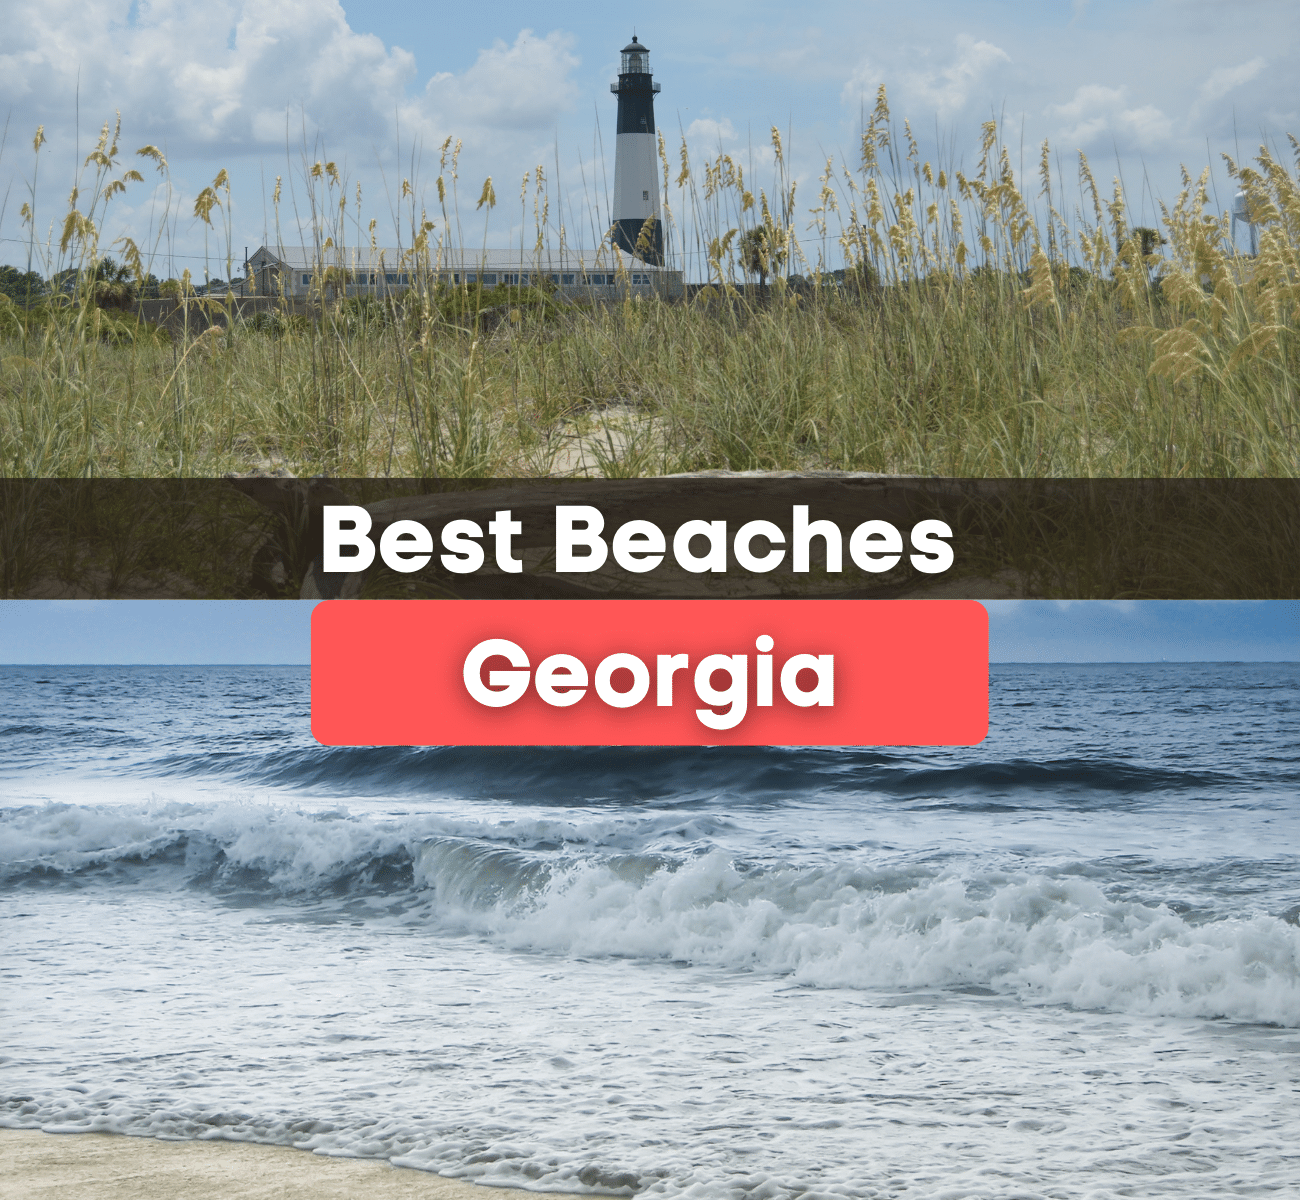 lighthouse and ocean - Best Beaches in Georgia